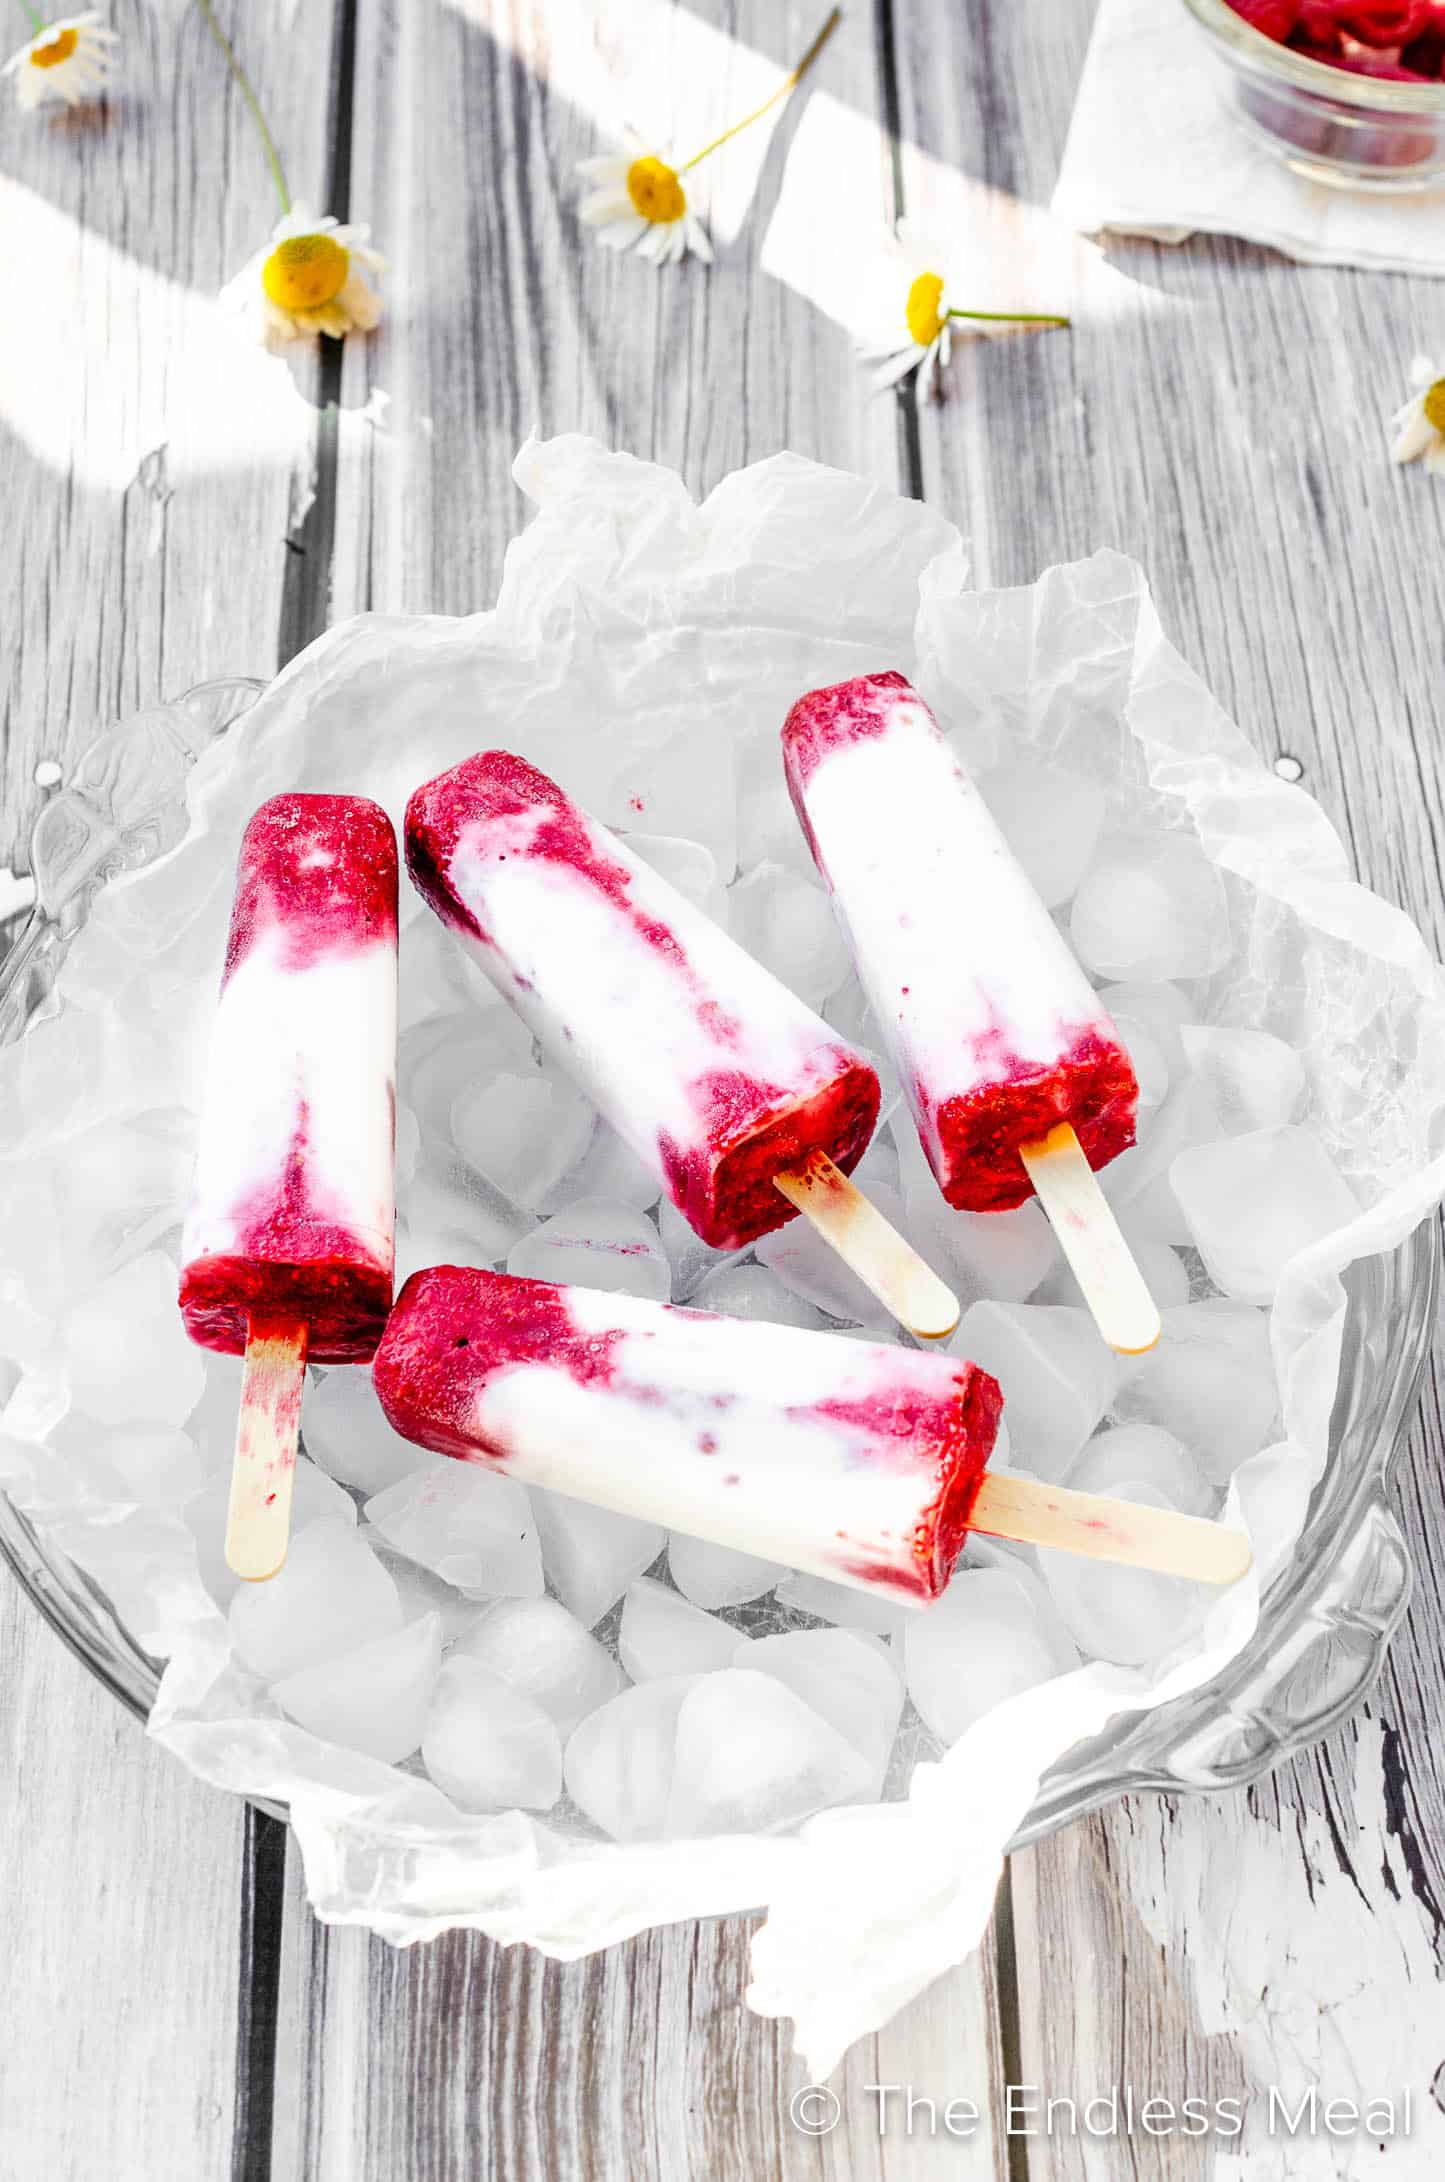 Looking down on a dessert tray of raspberry coconut popsicles